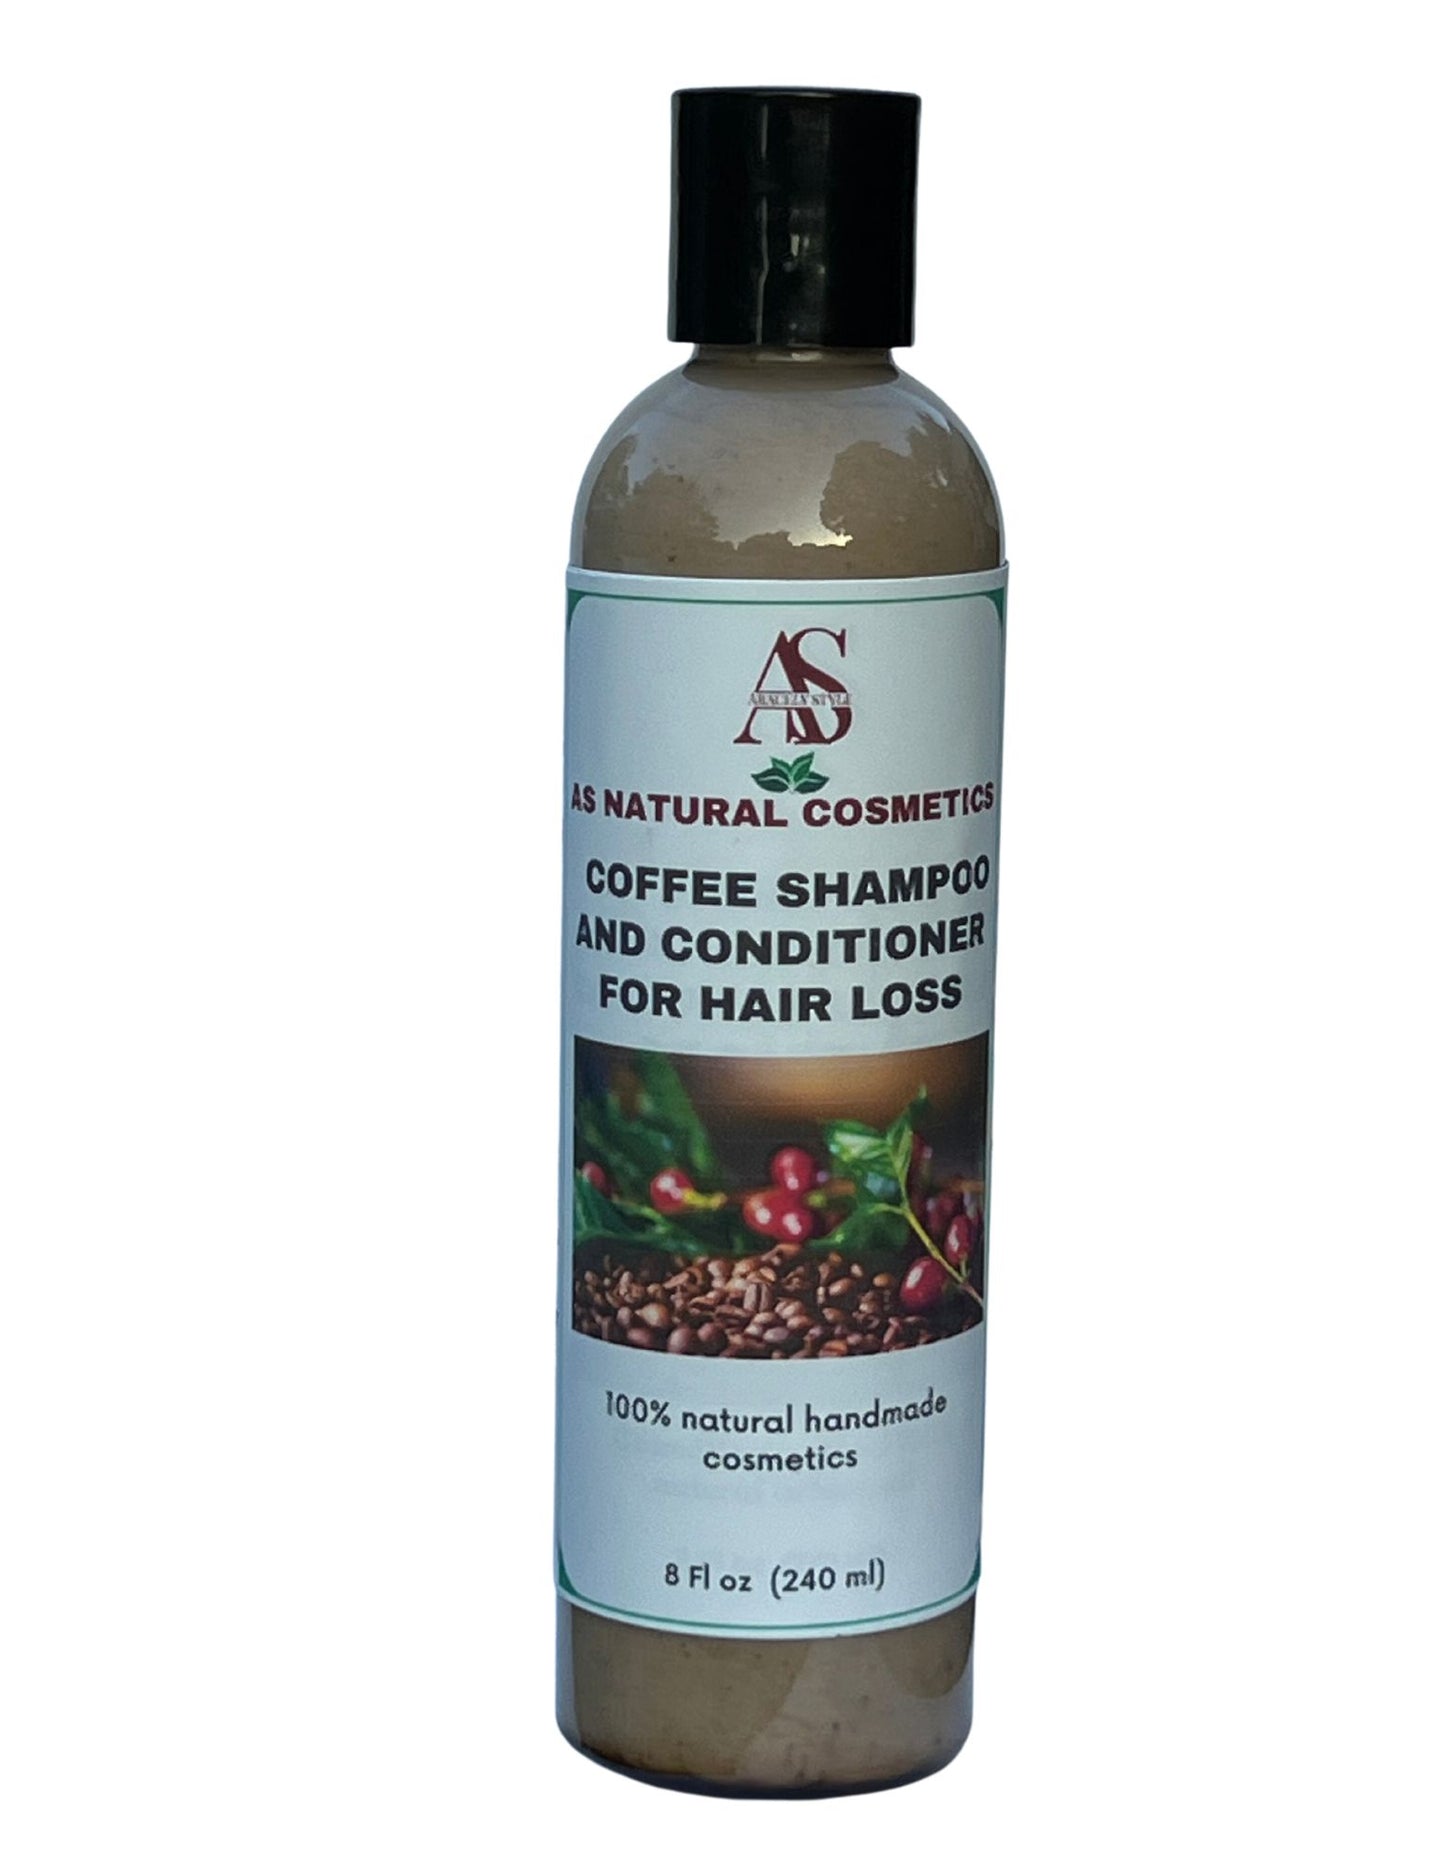 Coffee Shampoo & Conditioner for Hair Loss